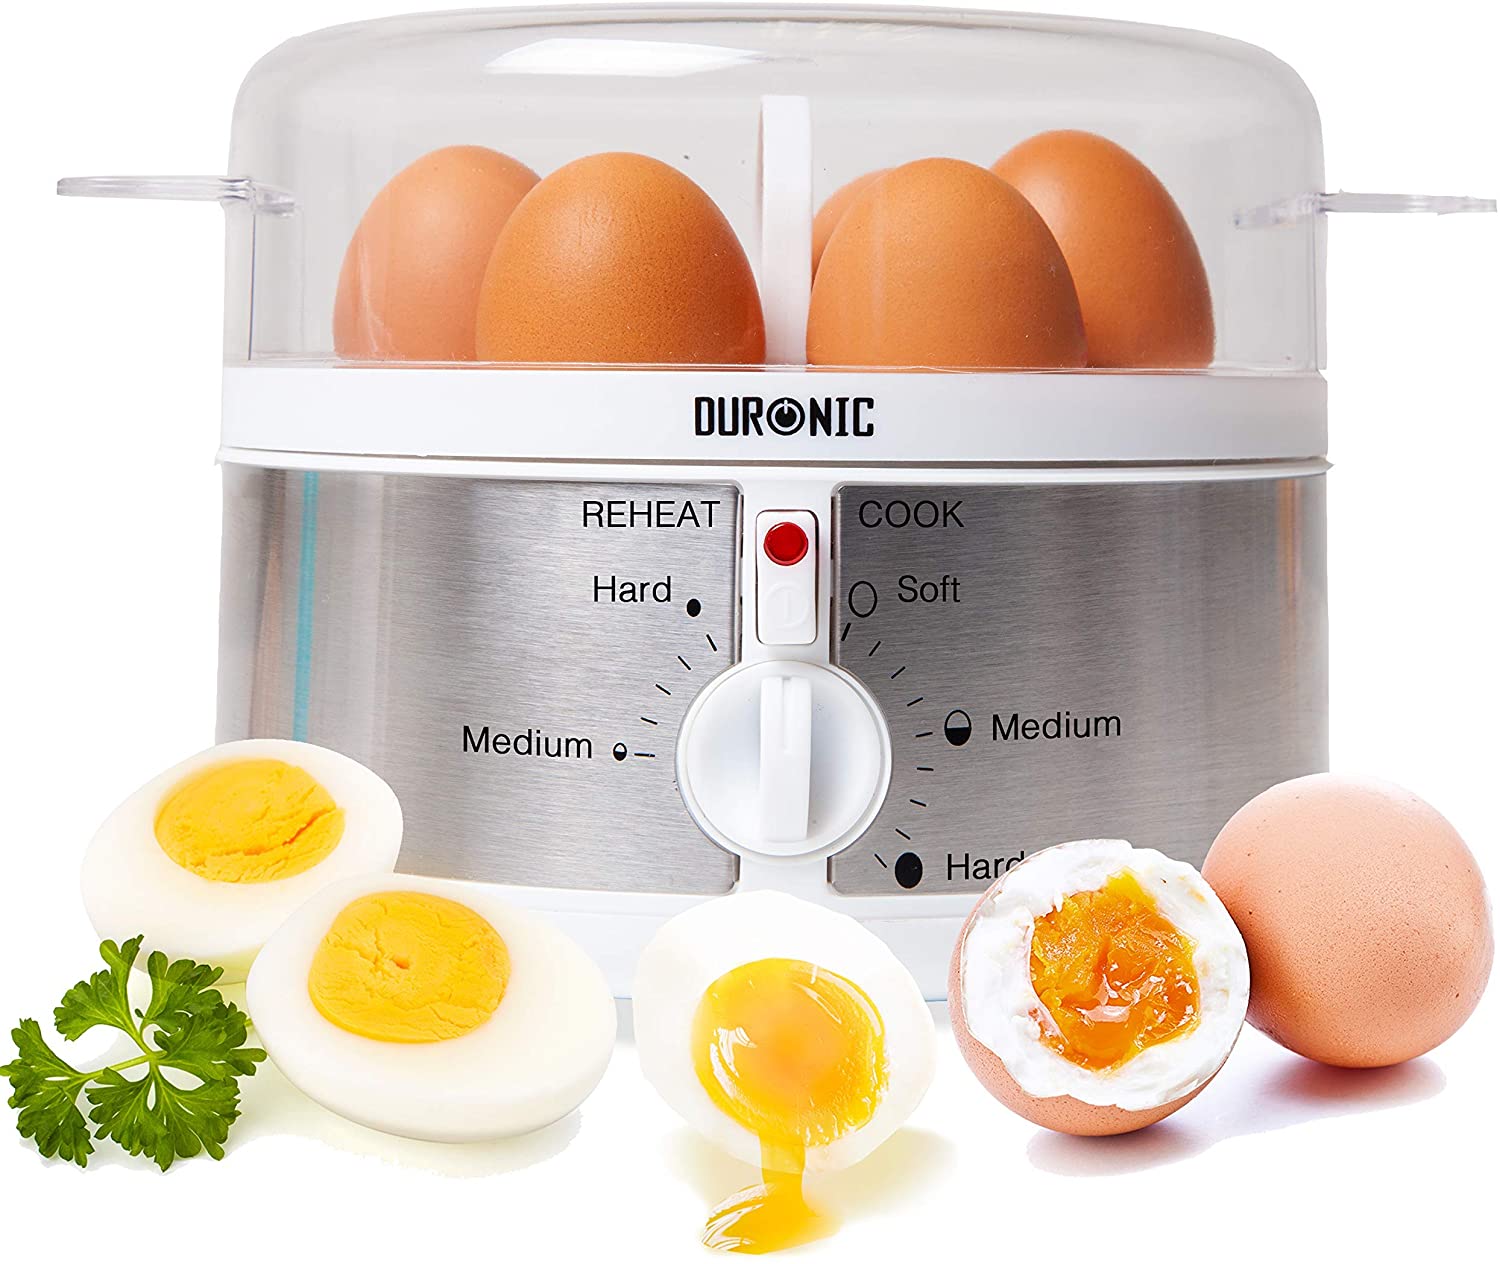 Duronic EB35 Egg Boiler for 1 to 7 Eggs - Hardness Setting and Timer - Prepare Eggs in 2 Different Ways at the Same Time - Includes Measuring Cup and Egg Cutter